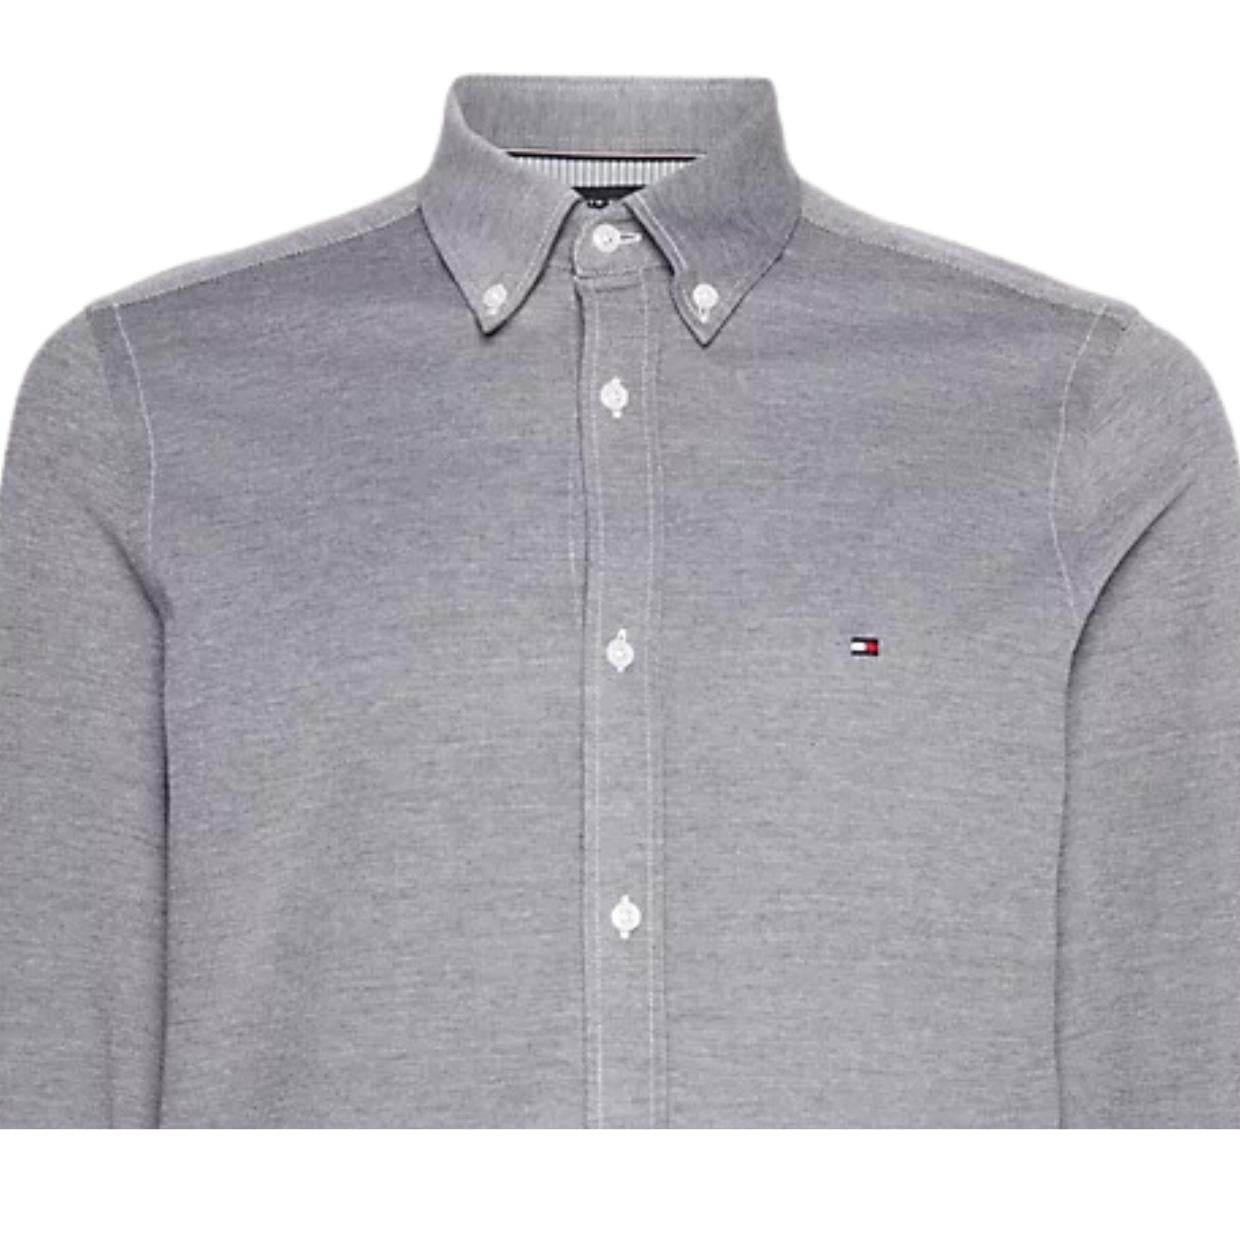 Tommy Hilfiger 1985 Knitted Carbon Navy Shirt